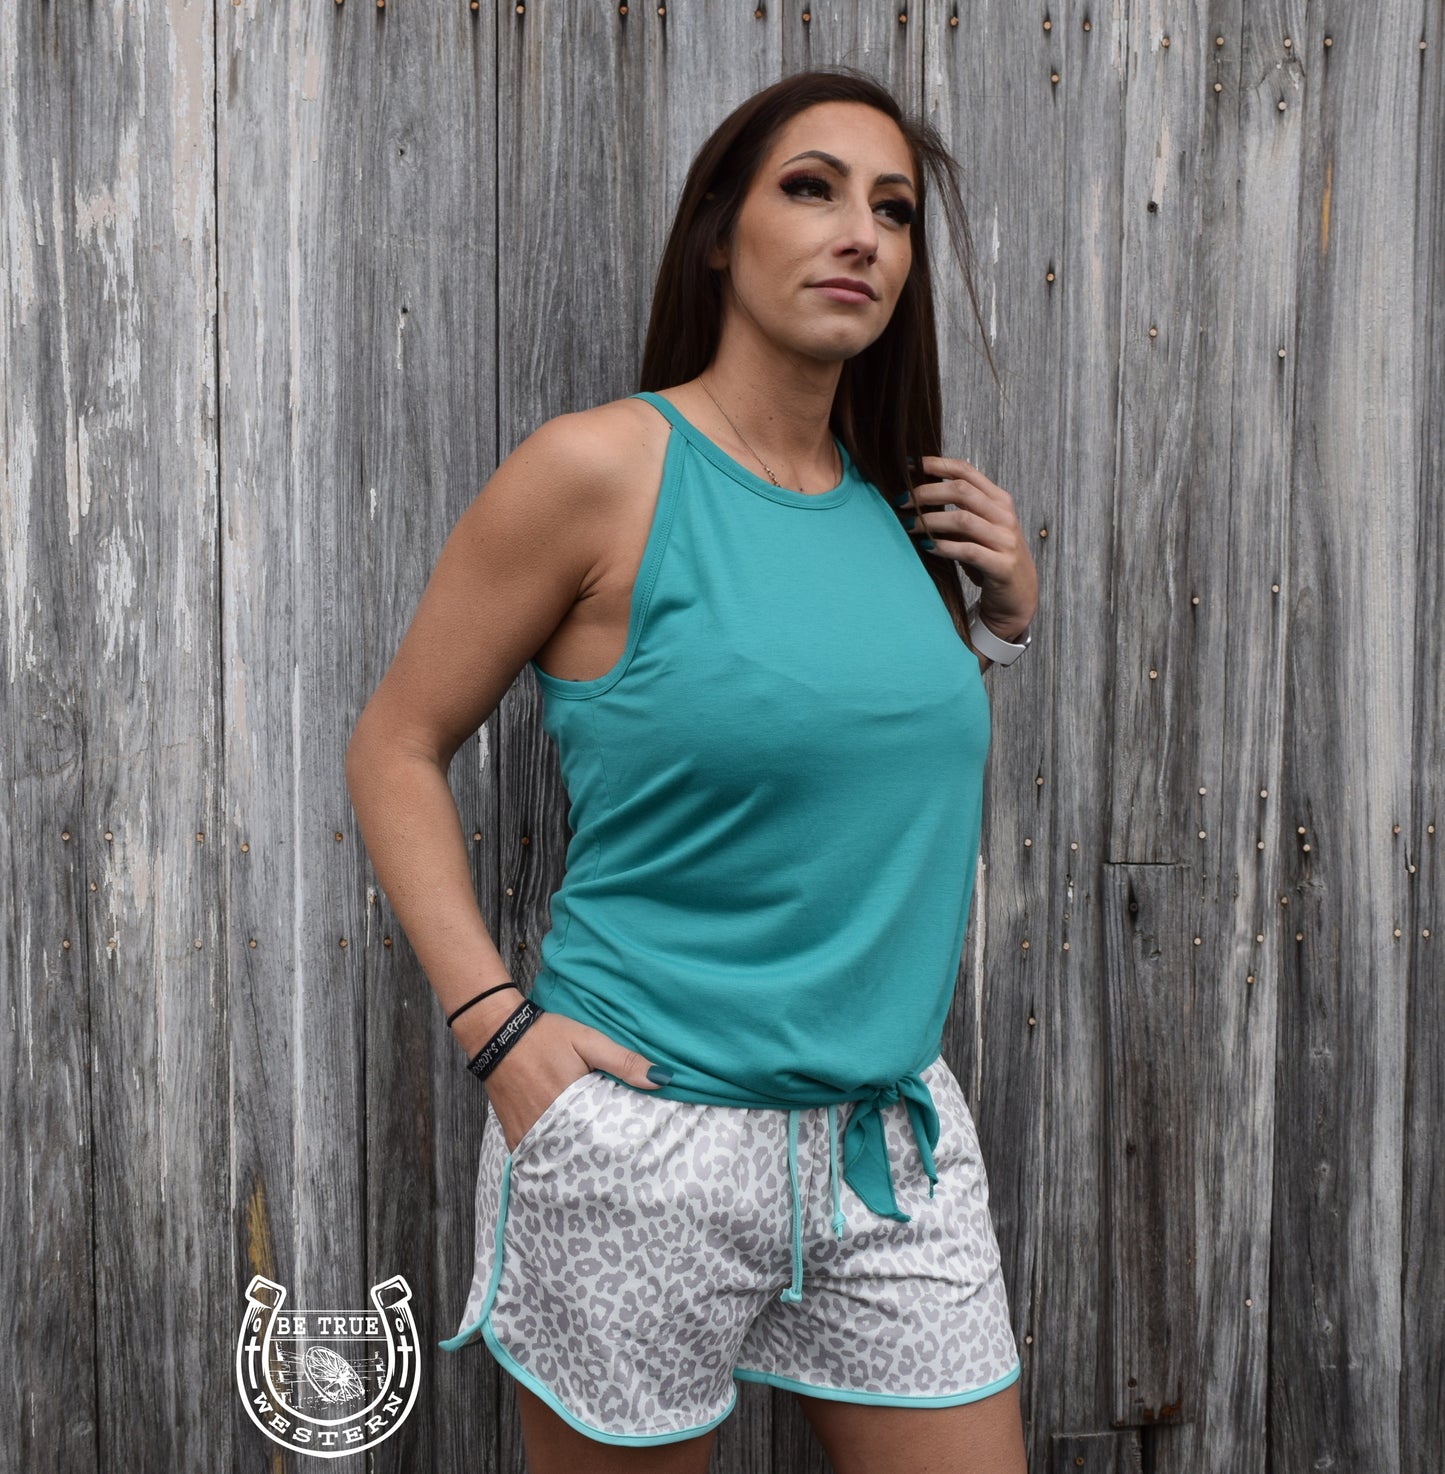 The Wild Woman Shorts